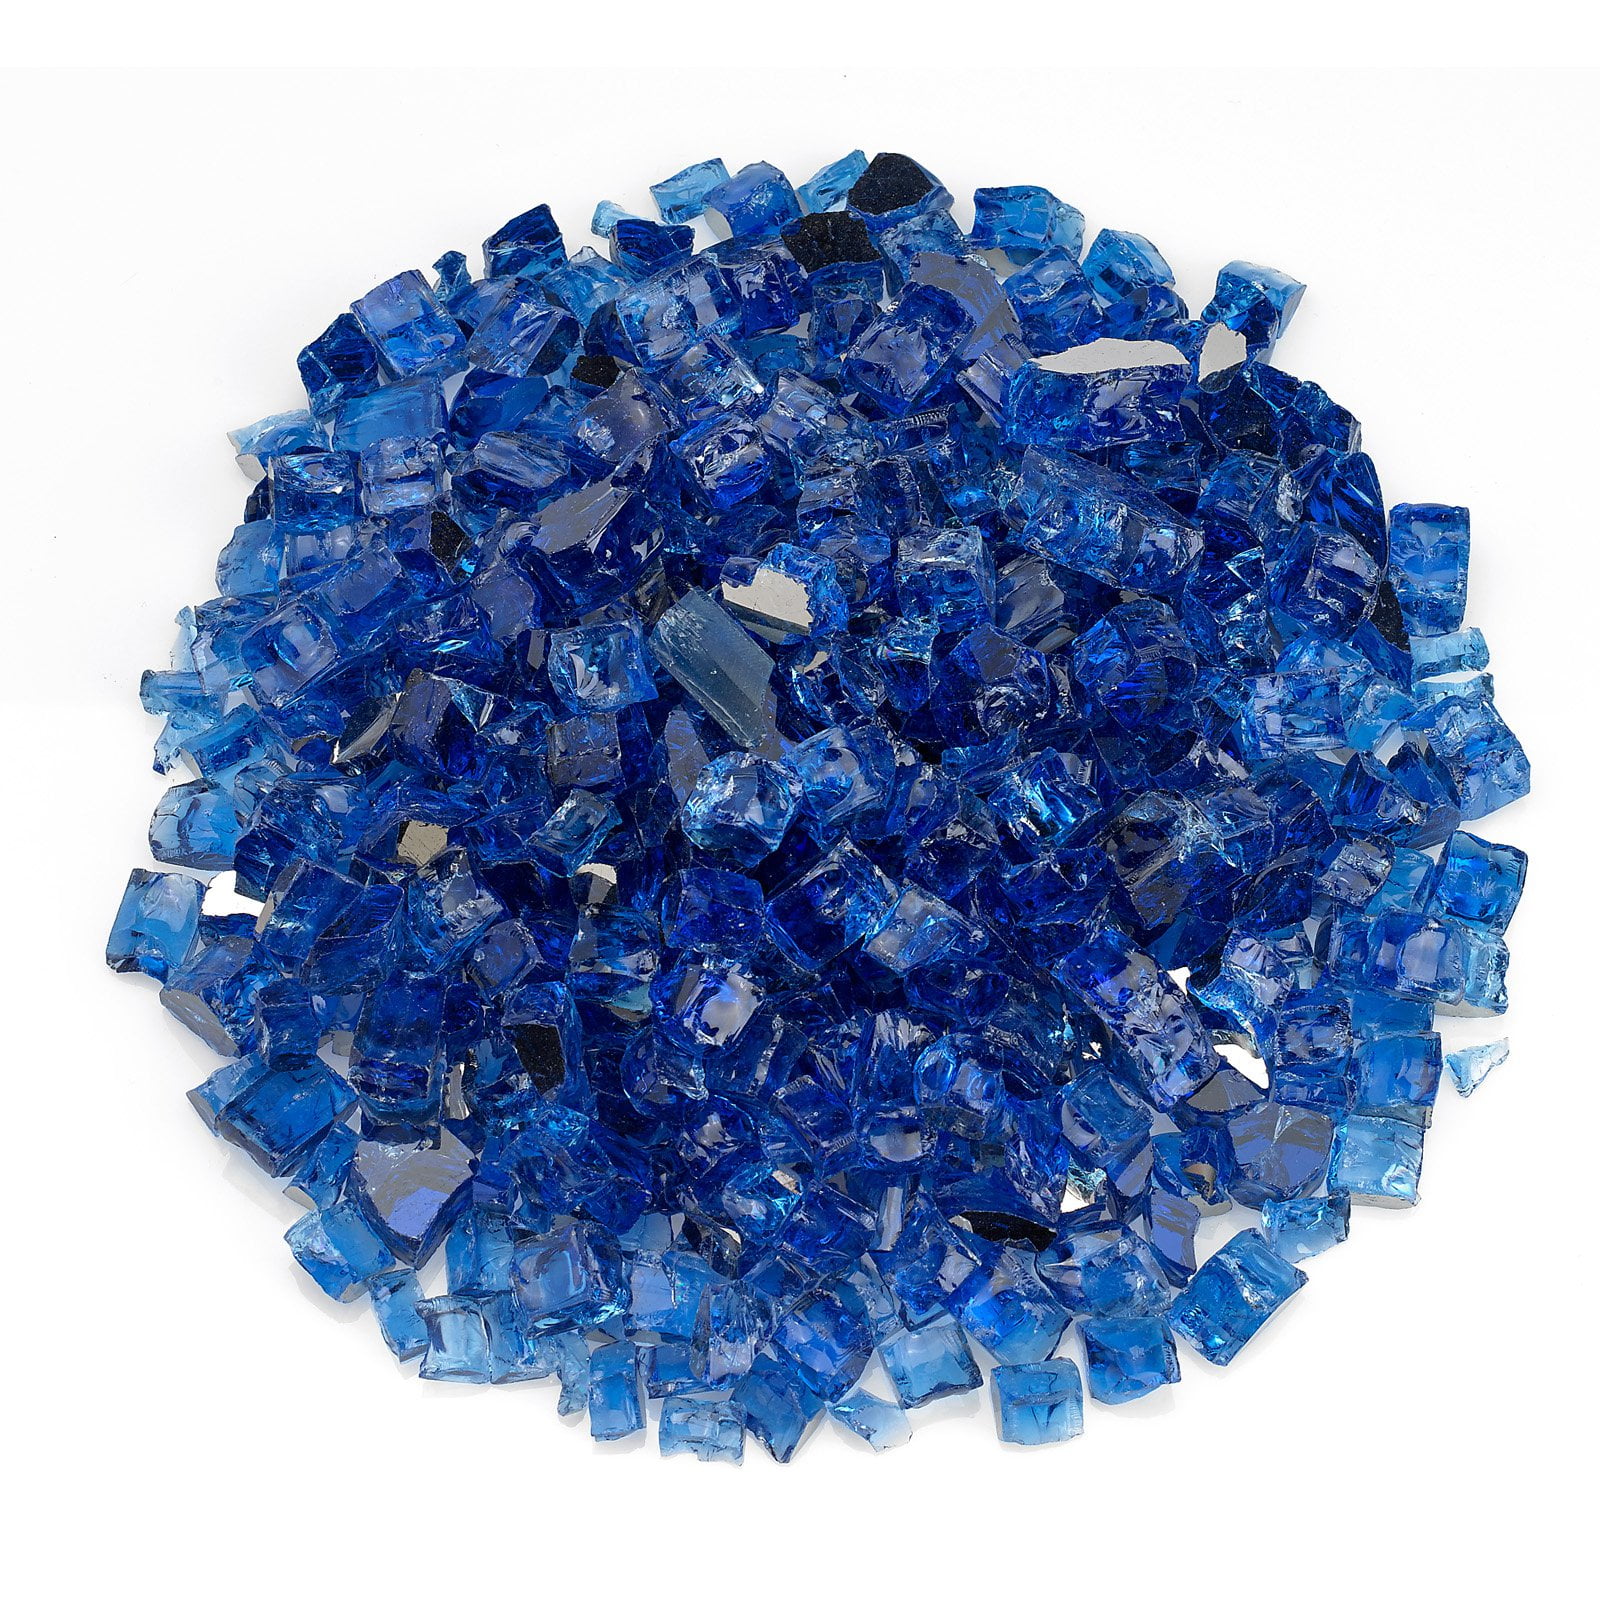 Picture of American Fireglass AFF-COBLRF12-10 0.5 in. Cobalt Blue Reflective Fire Glass - 10 lbs